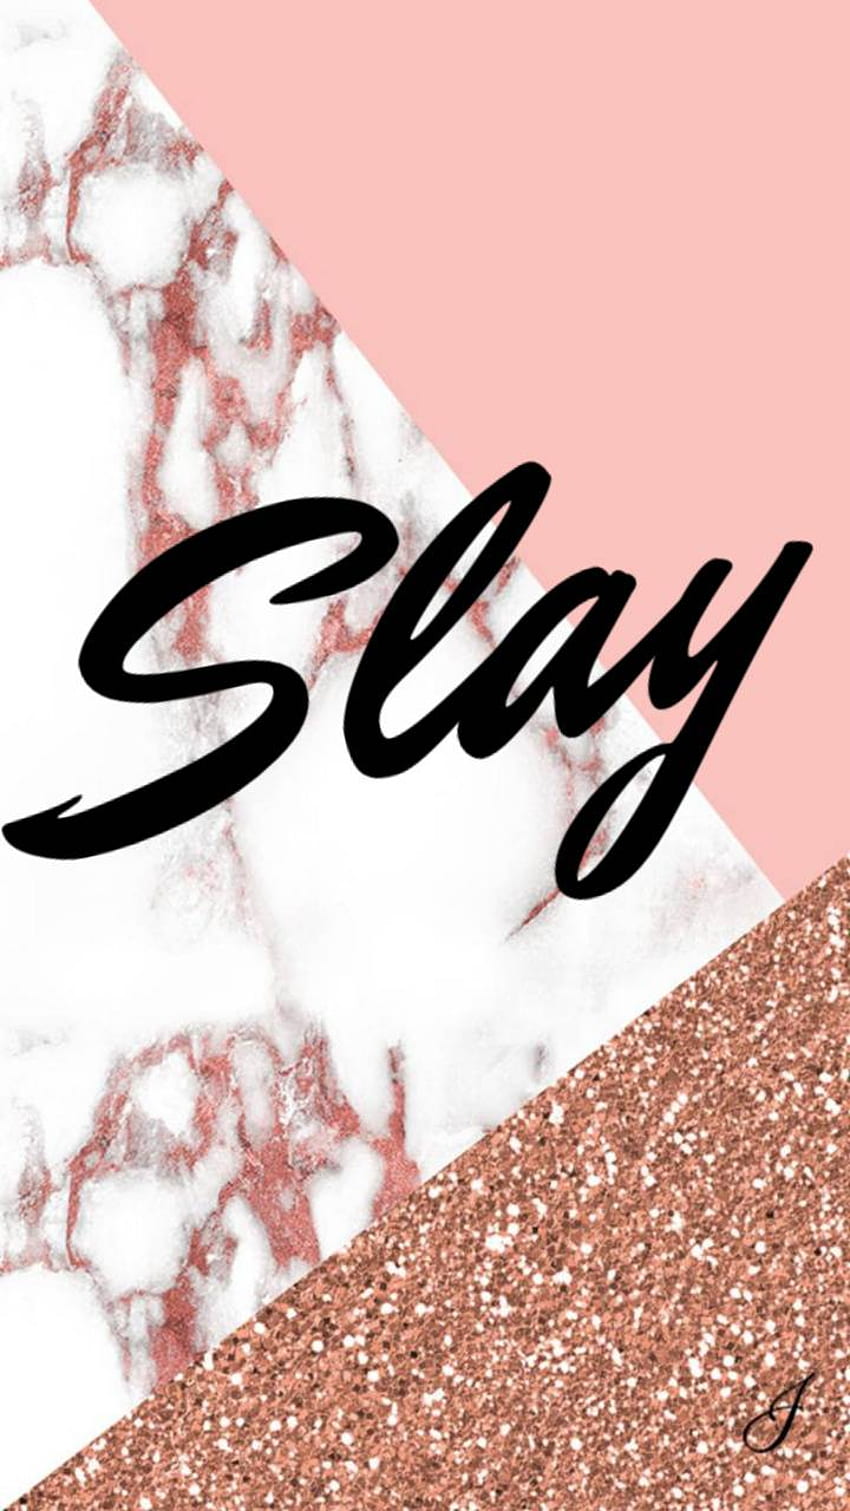 Wake Pray Slay quote motivation background wallpaper you can download for  free on the blog